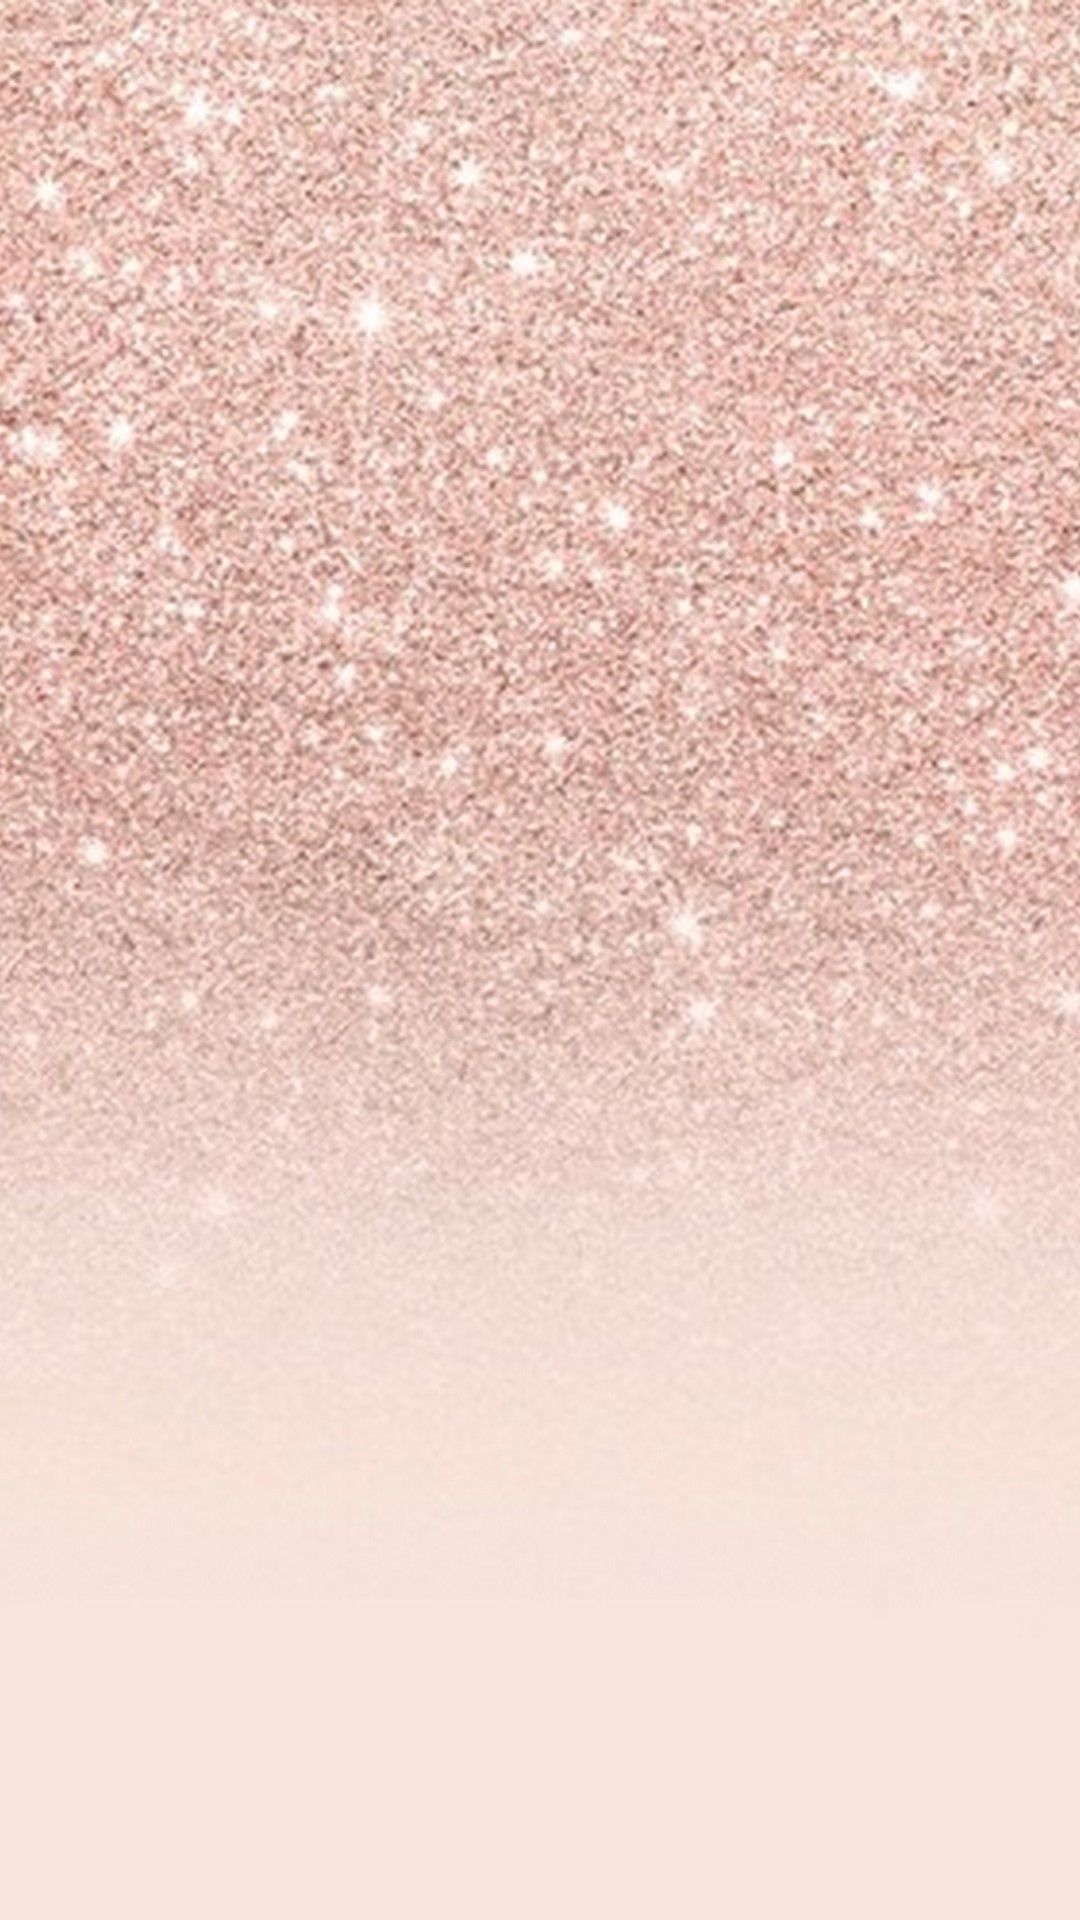 Rose Gold Pretty Wallpapers